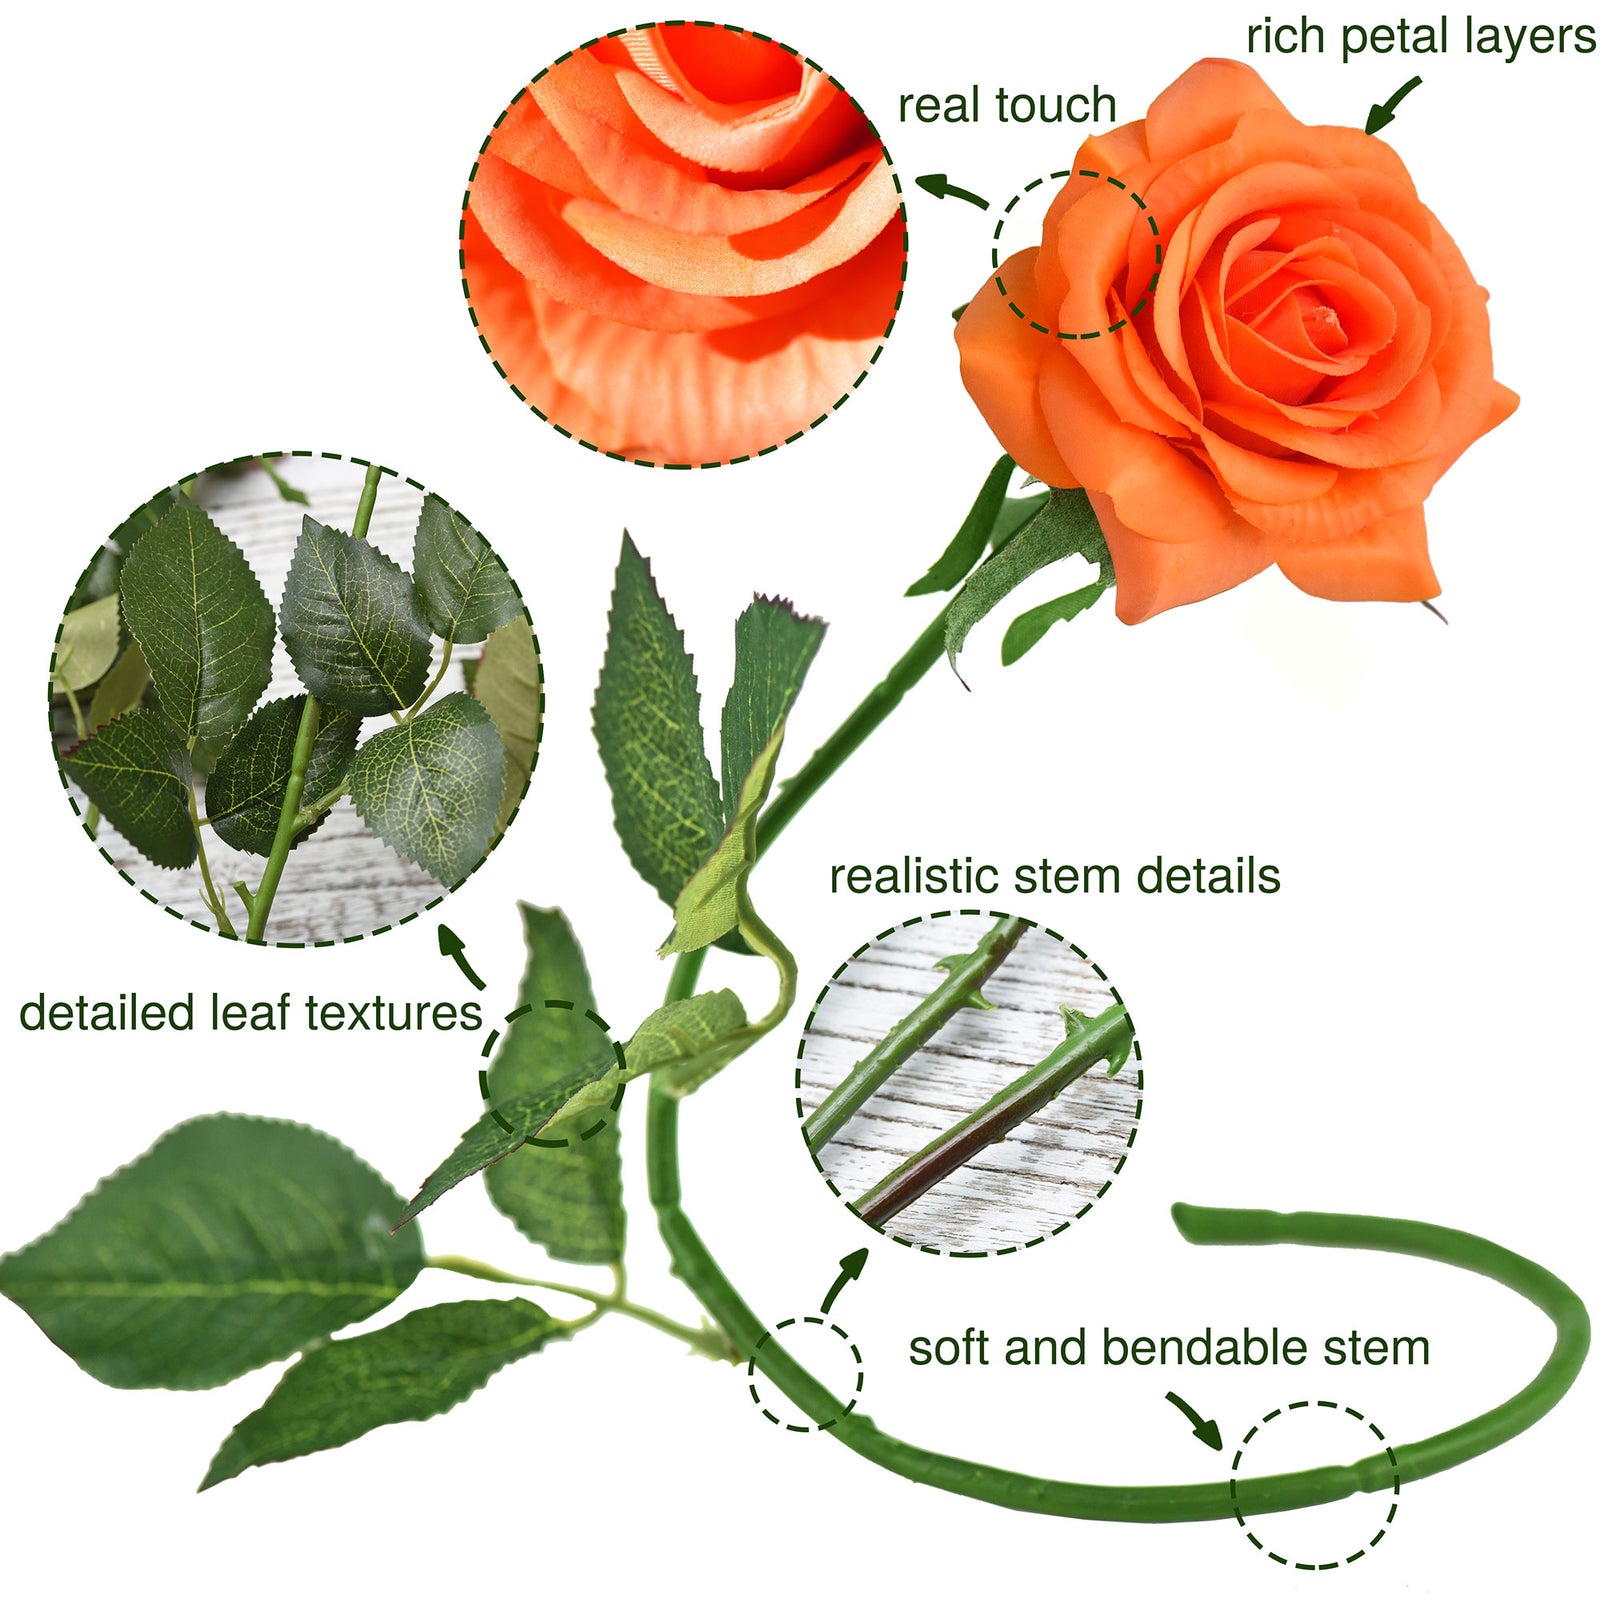 Tangerine Orange Real Touch Roses Silk Artificial Flowers ‘Petals Feel and Look like Fresh Roses' (10 Stems)